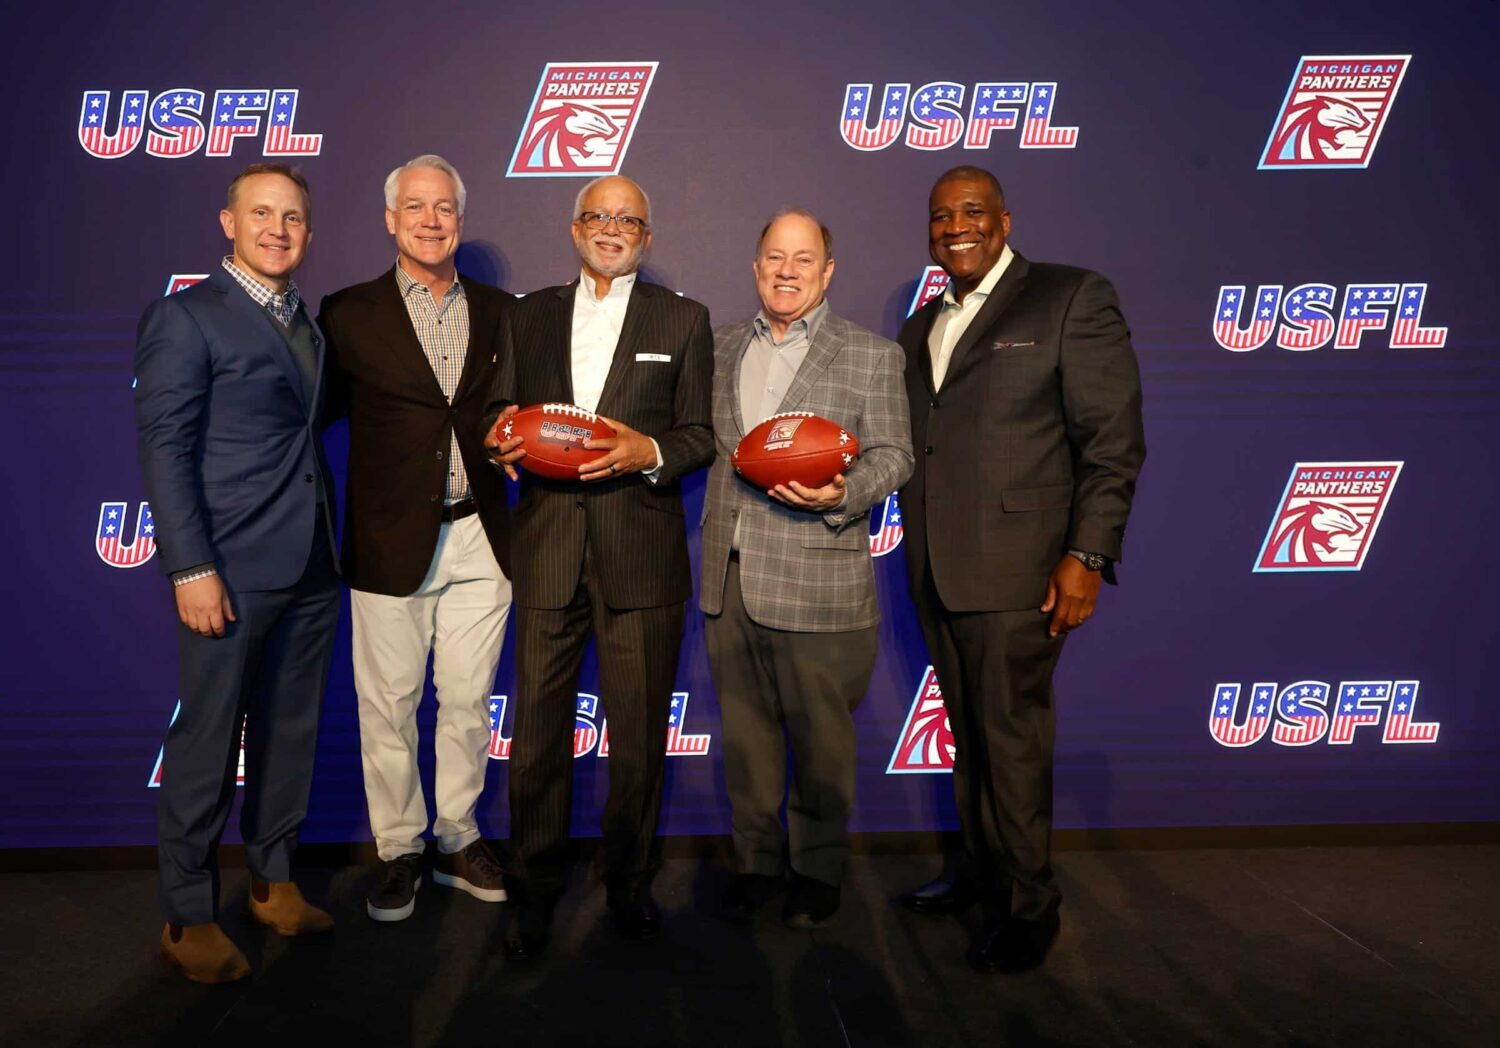 (From left) Fox Sports CEO Eric Shanks, USFL executive vice president Daryl Johnston, Wayne County executive Warren Evans, Detroit Mayor Mike Duggan and Fox Sports' Curt Menefee pose for a photograph after a press conference and announcement on Thursday, Jan. 26, 2023 about the Michigan Panthers of the USFL returning to play at Ford Field in Detroit starting on April 30th. Usfldetroit 012623 Es13